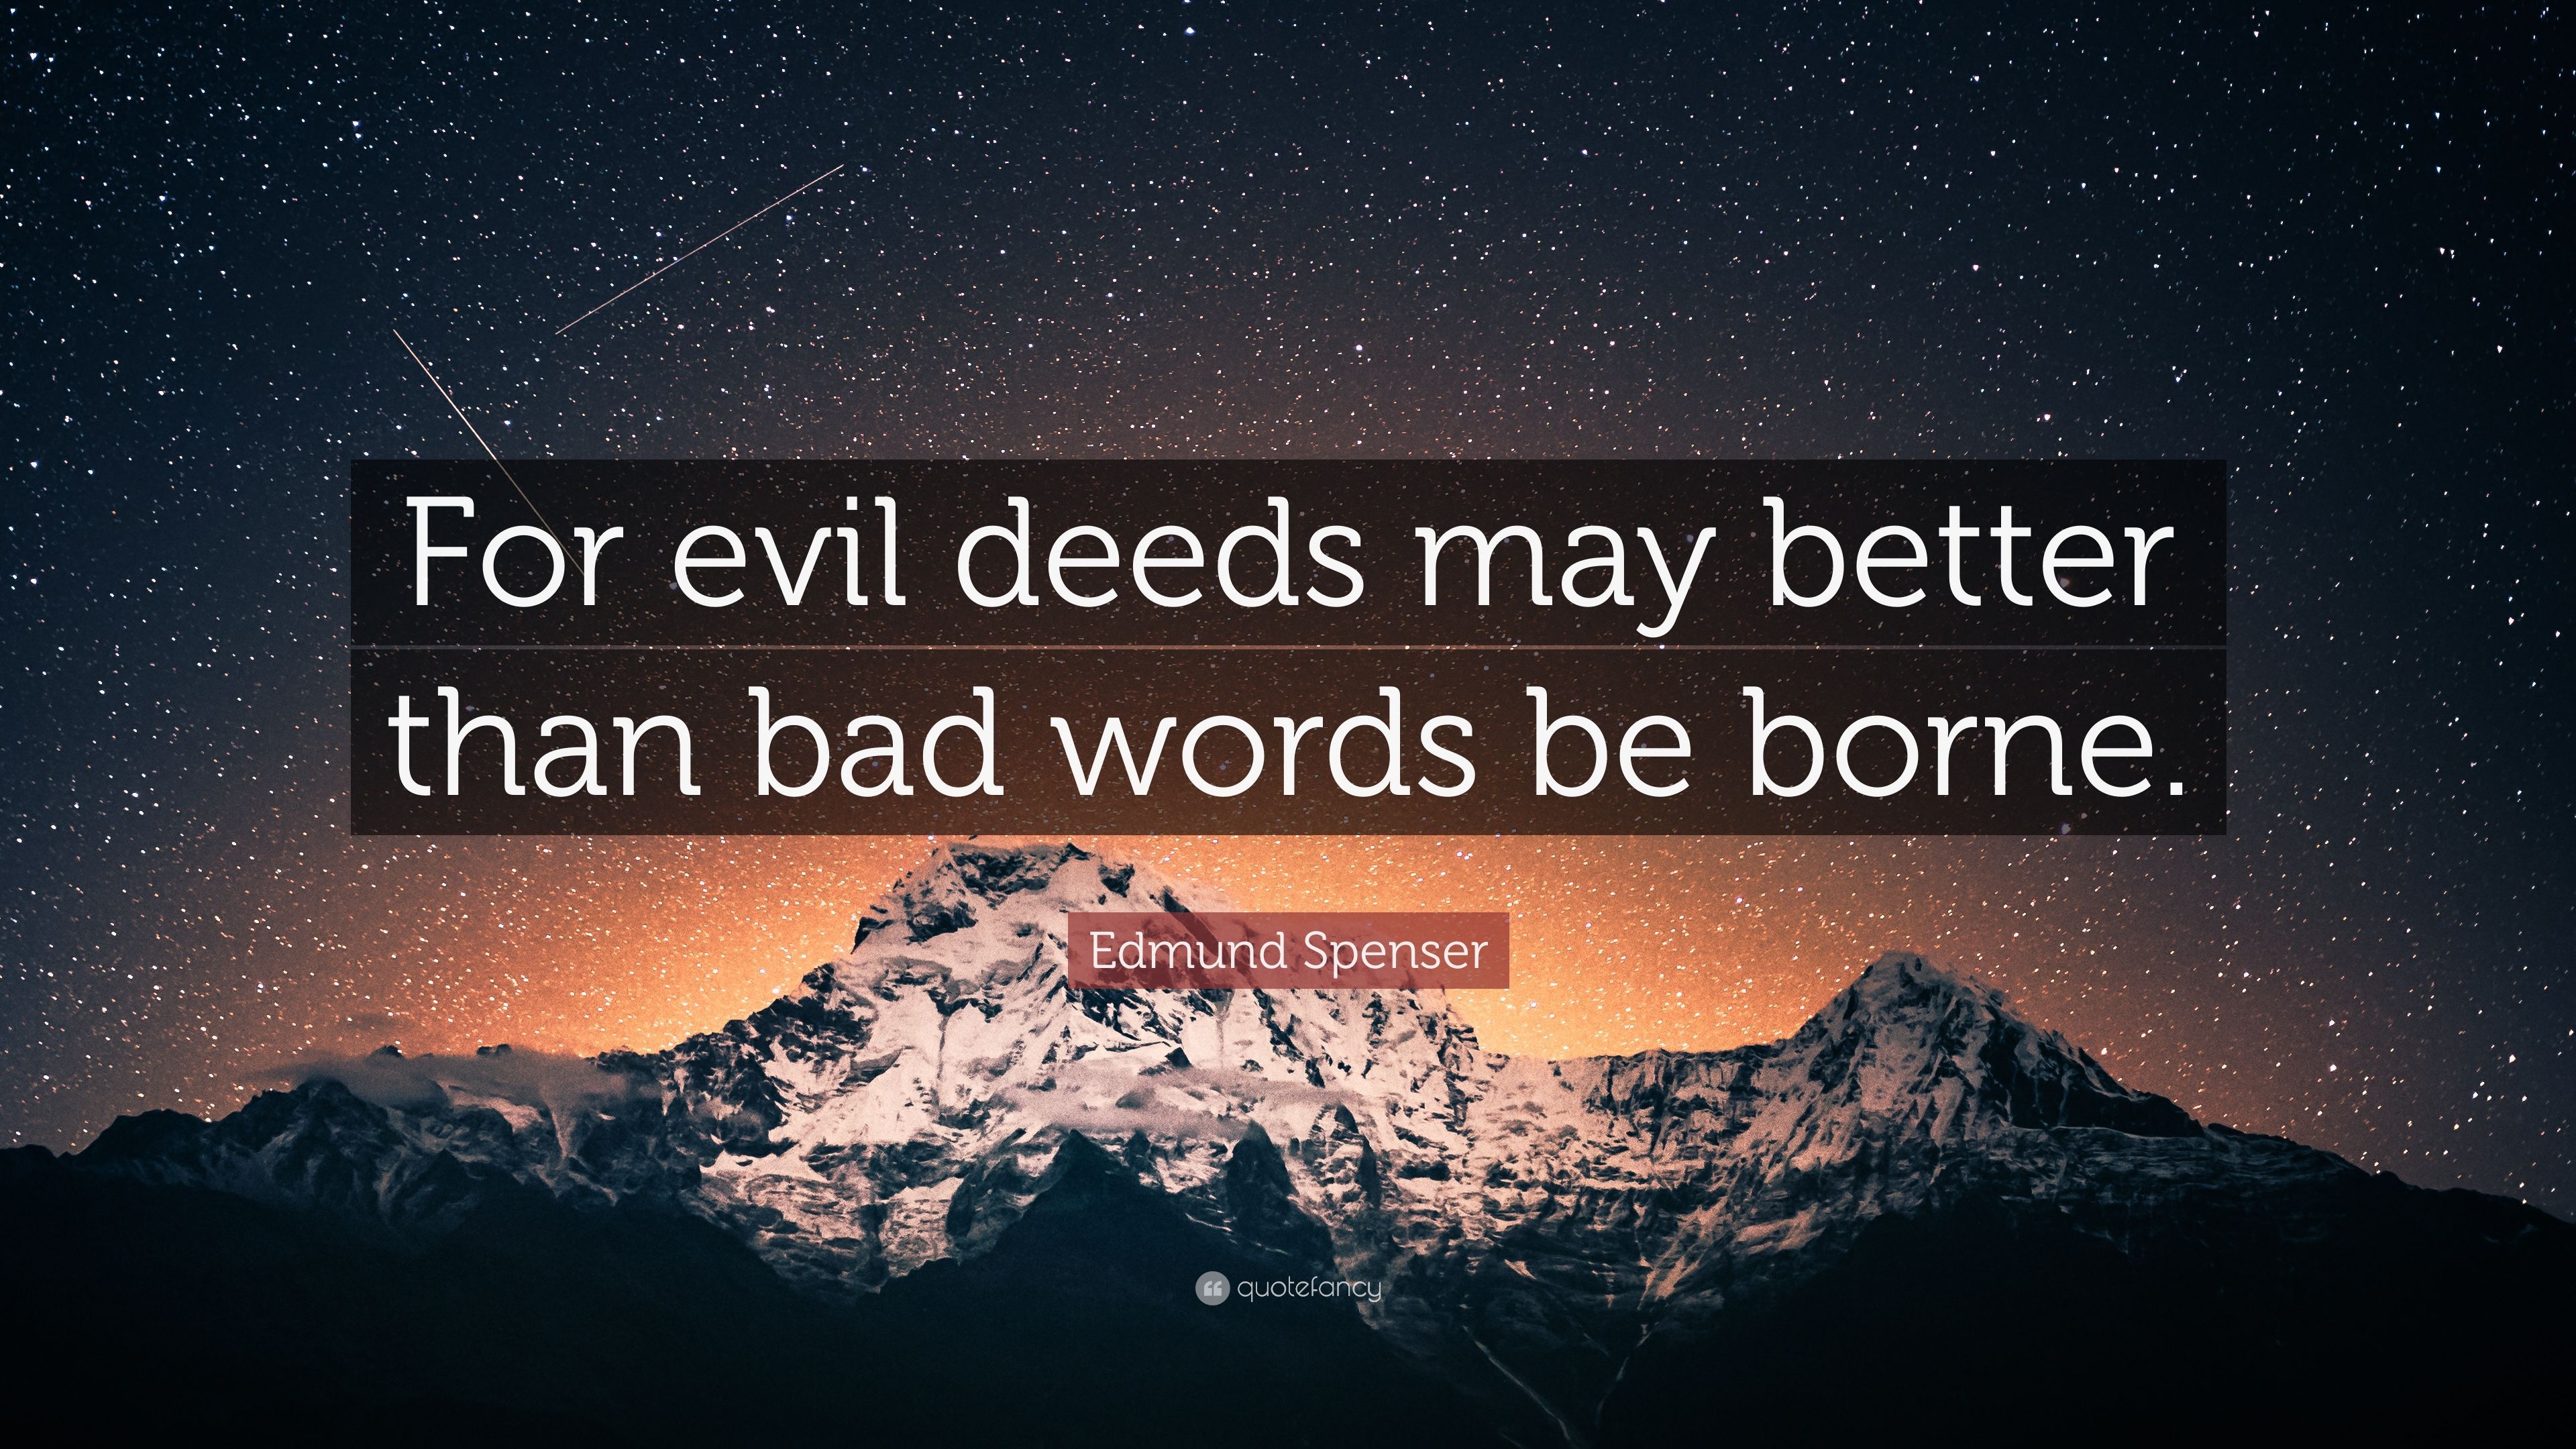 Edmund Spenser Quote: “For evil deeds may better than bad words be